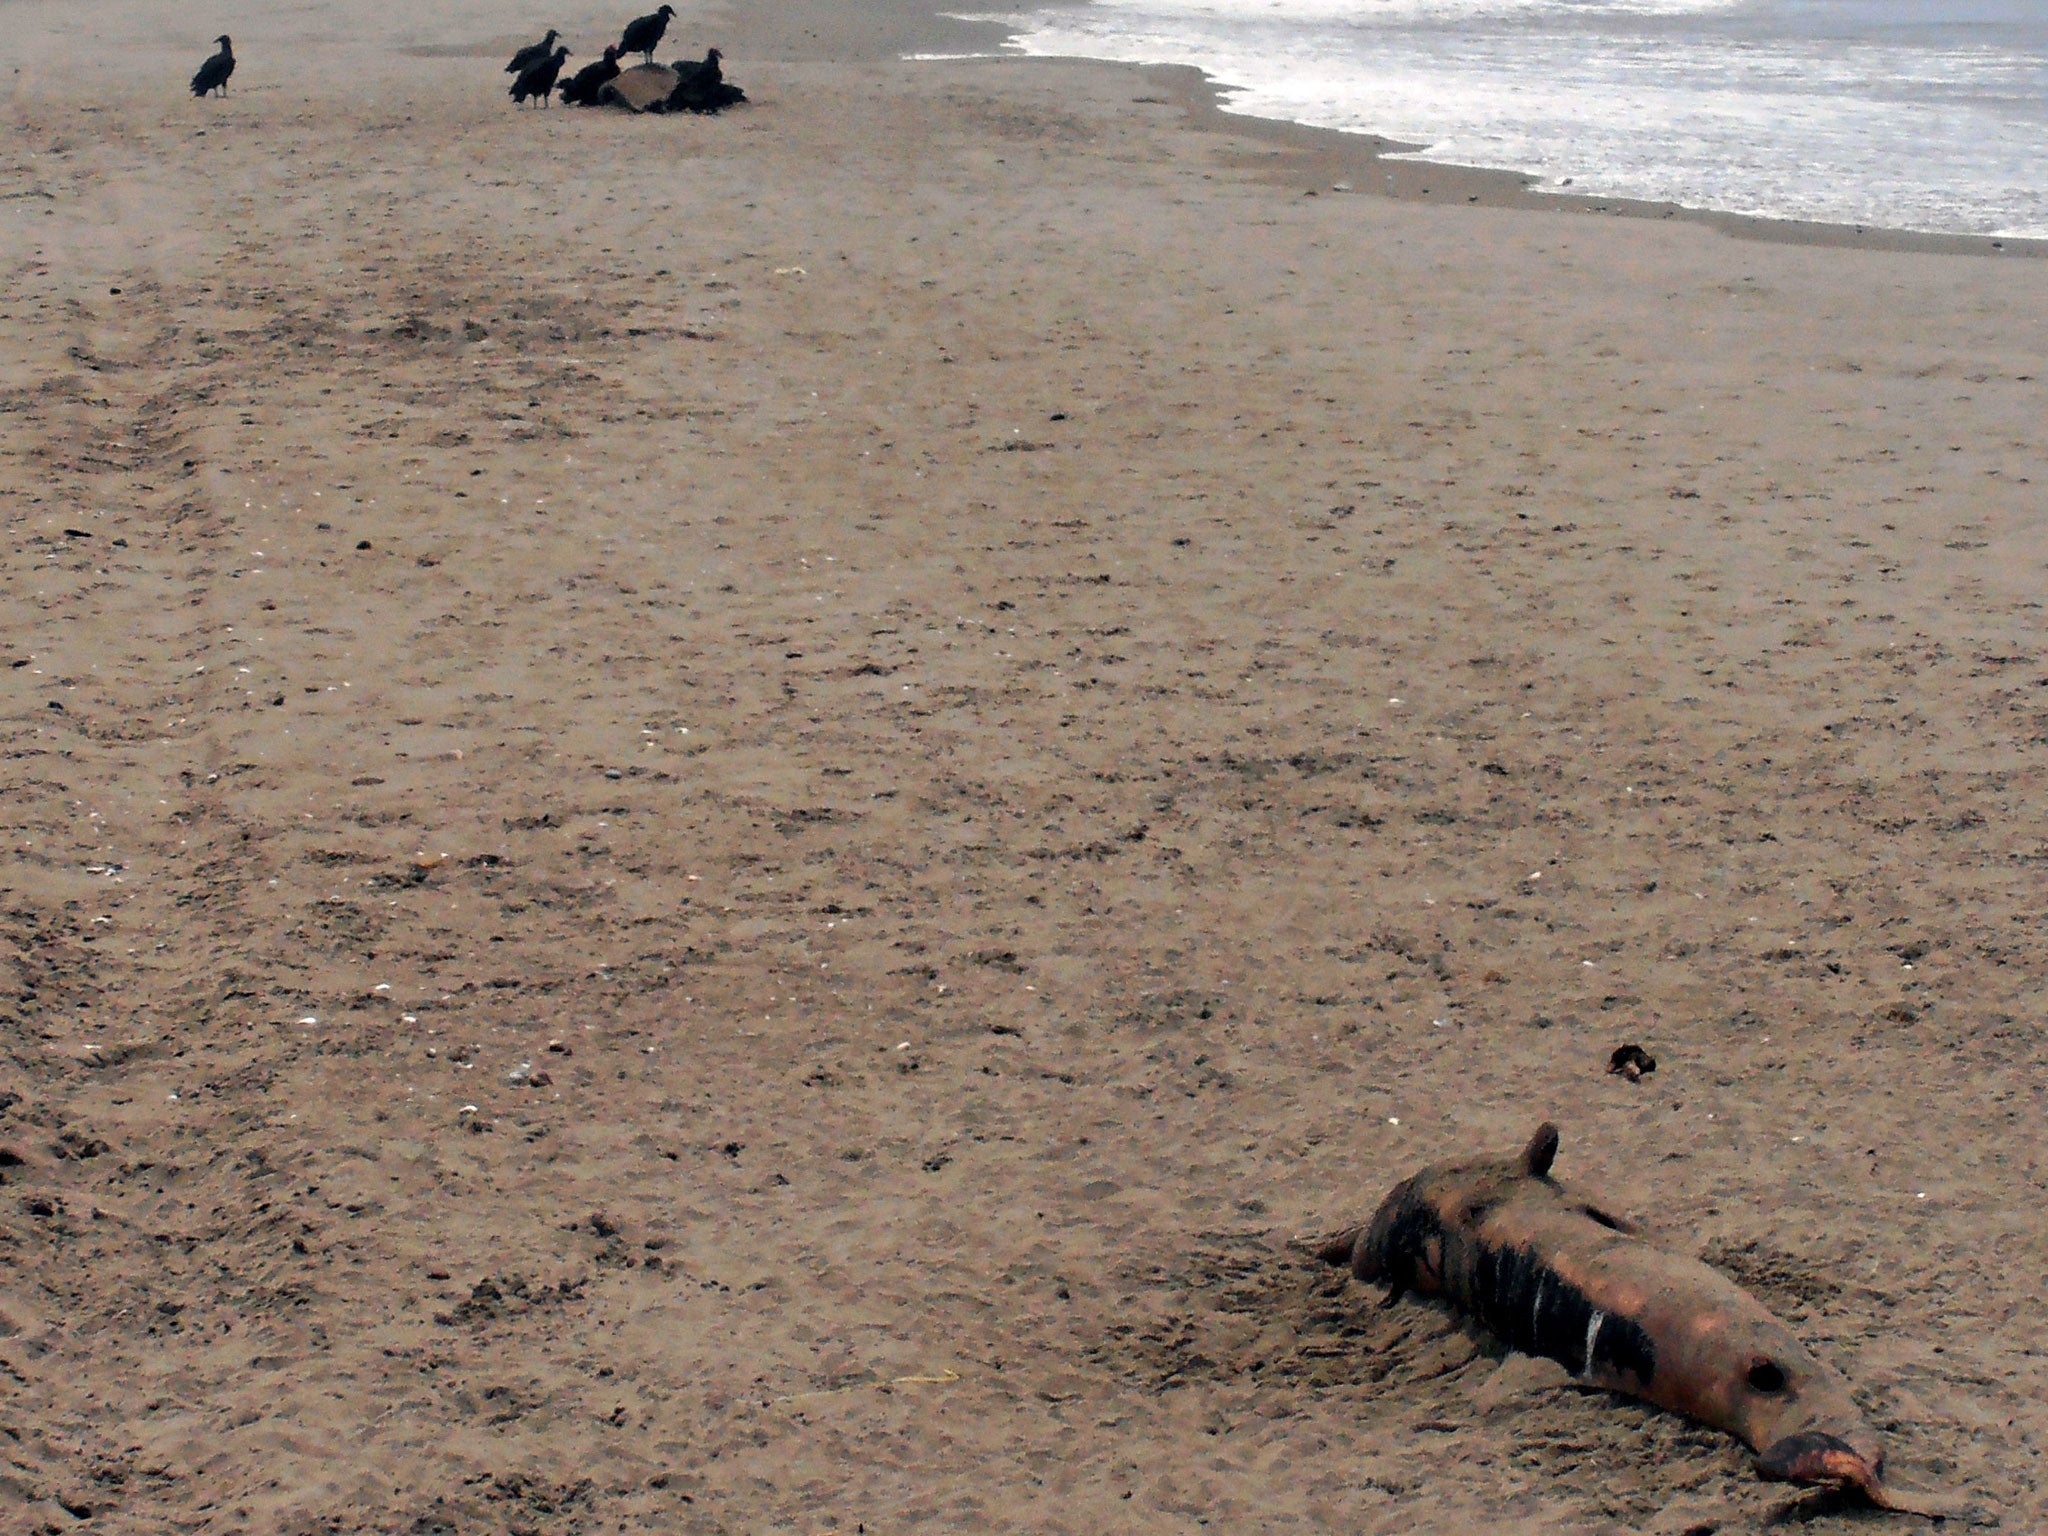 Vultures approach the remains of dolphins washed ashore in Lambayeque, in the northern coast of Peru, some 750 kilometers north of Lima on January 27, 2014.